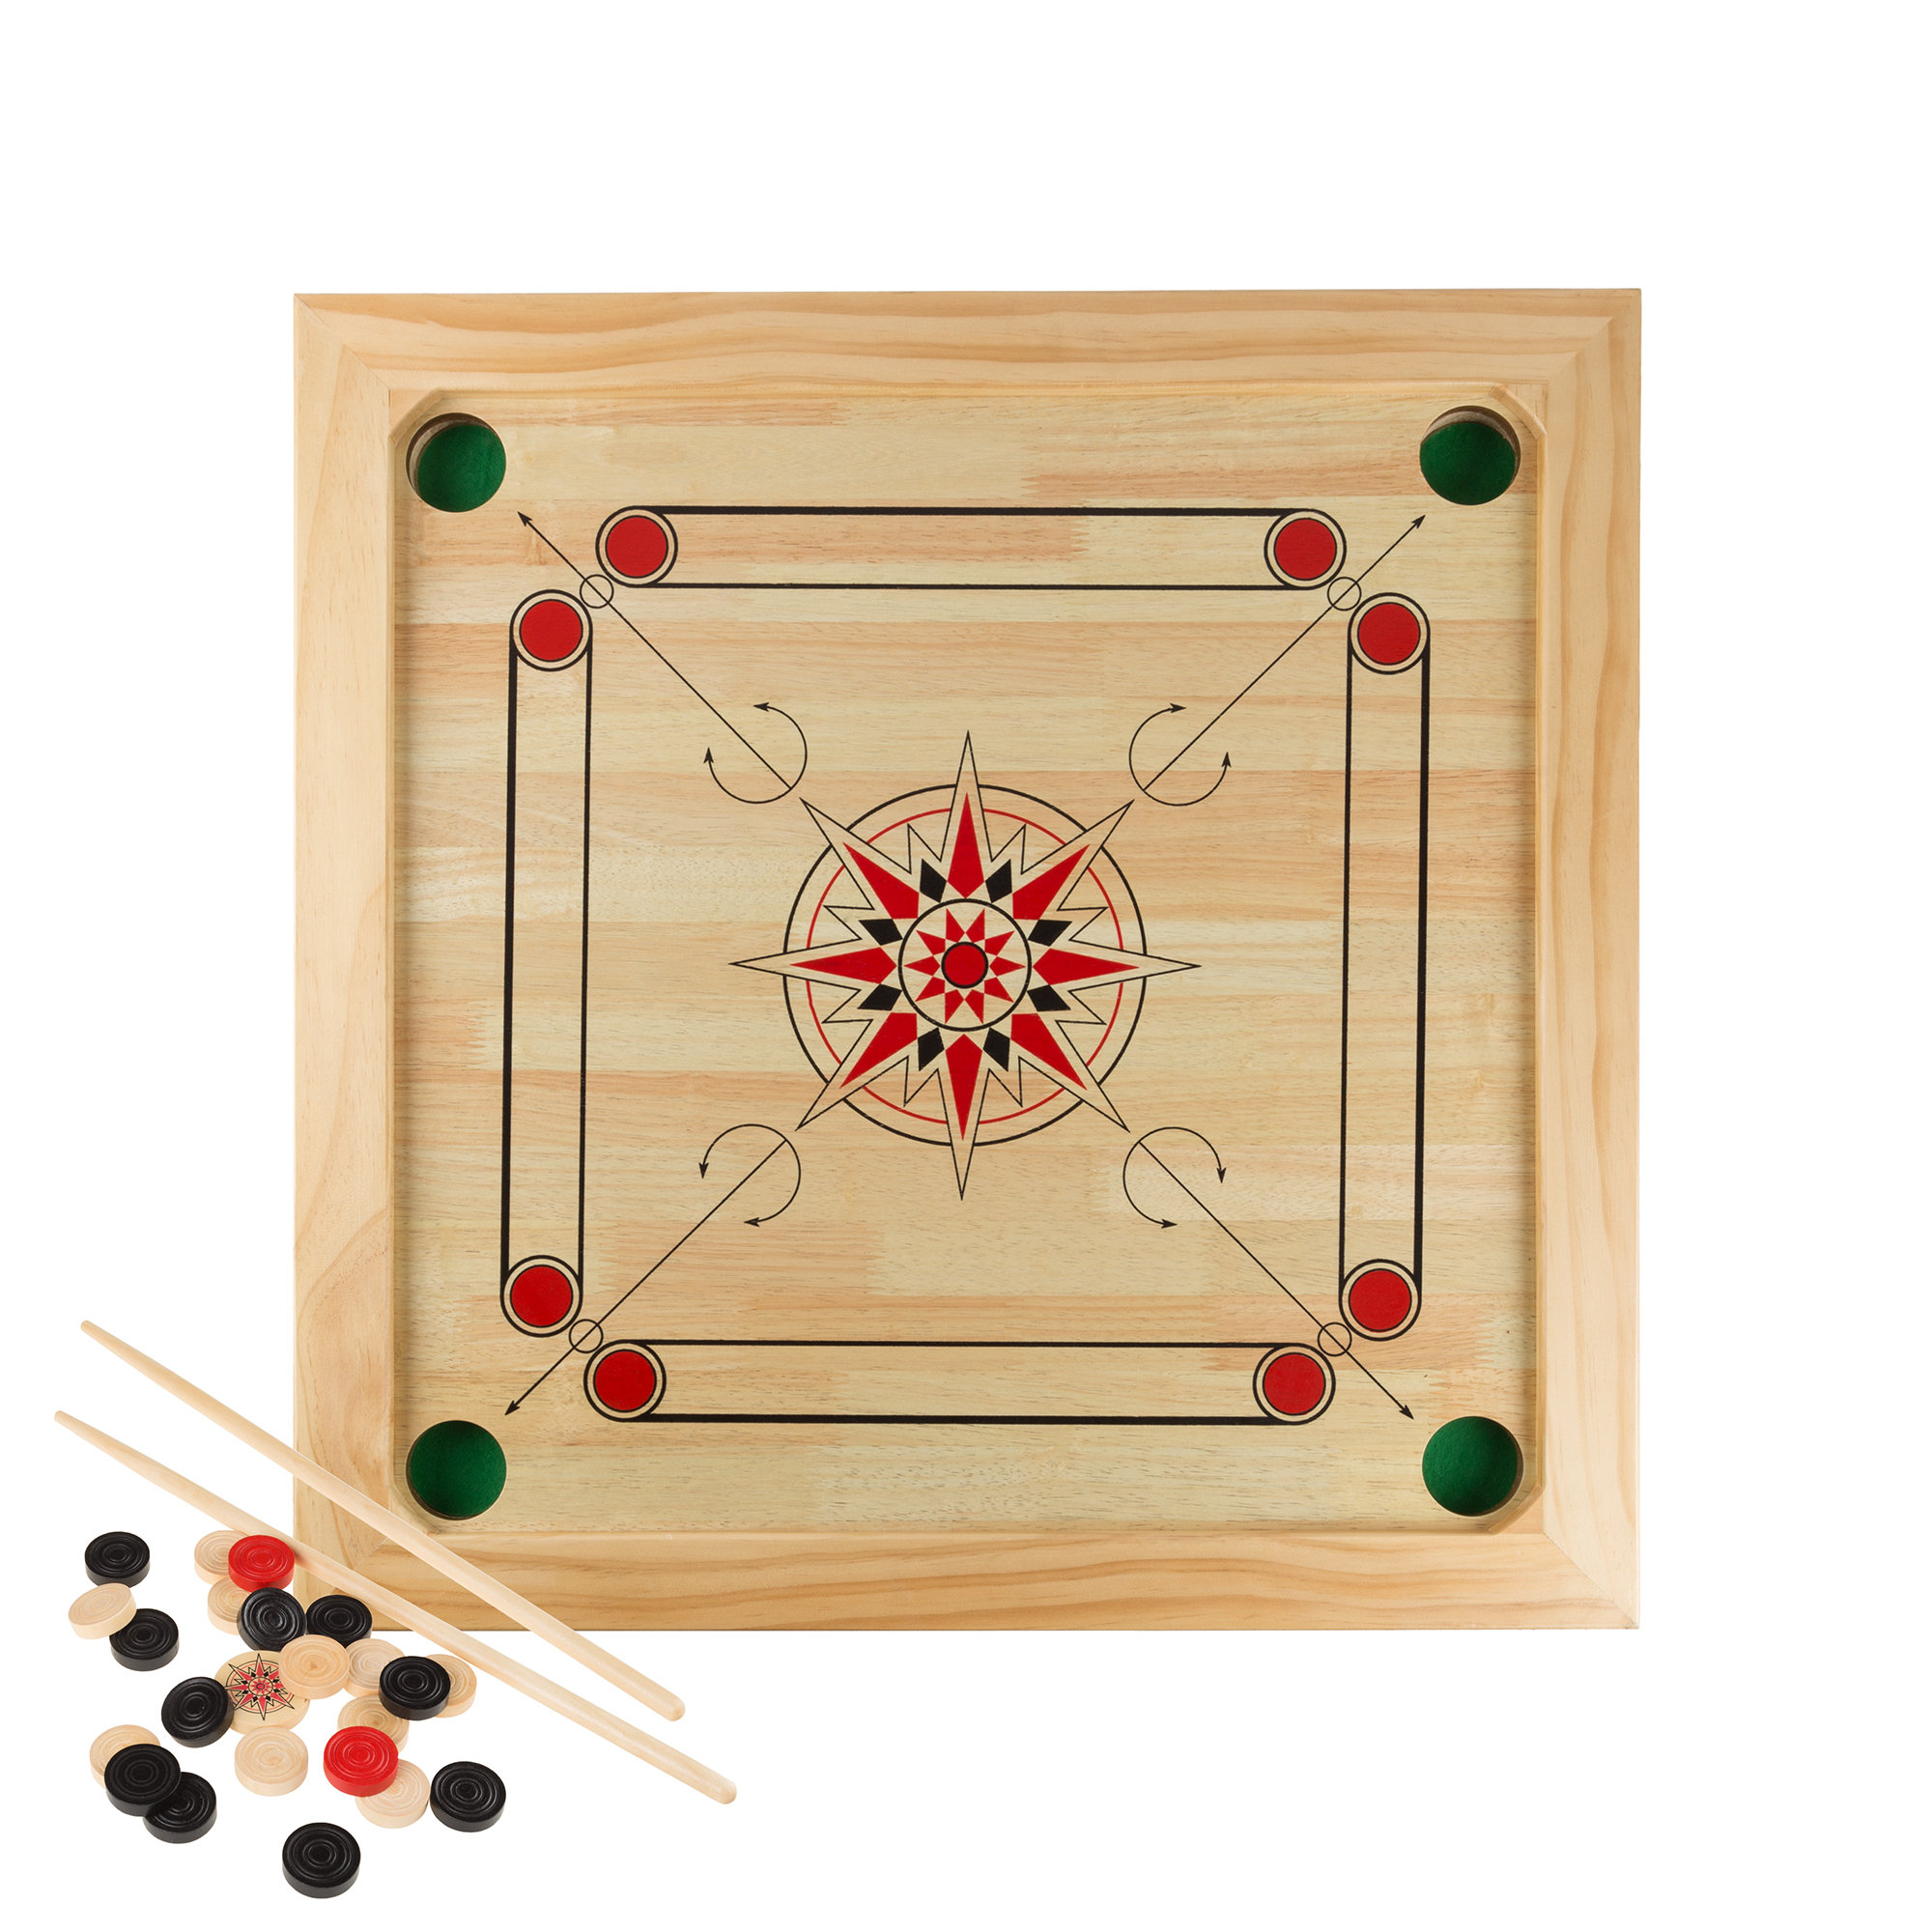 New High Quality Carrom Board Game Large 29 X 29 inch  Great for Family Fun 